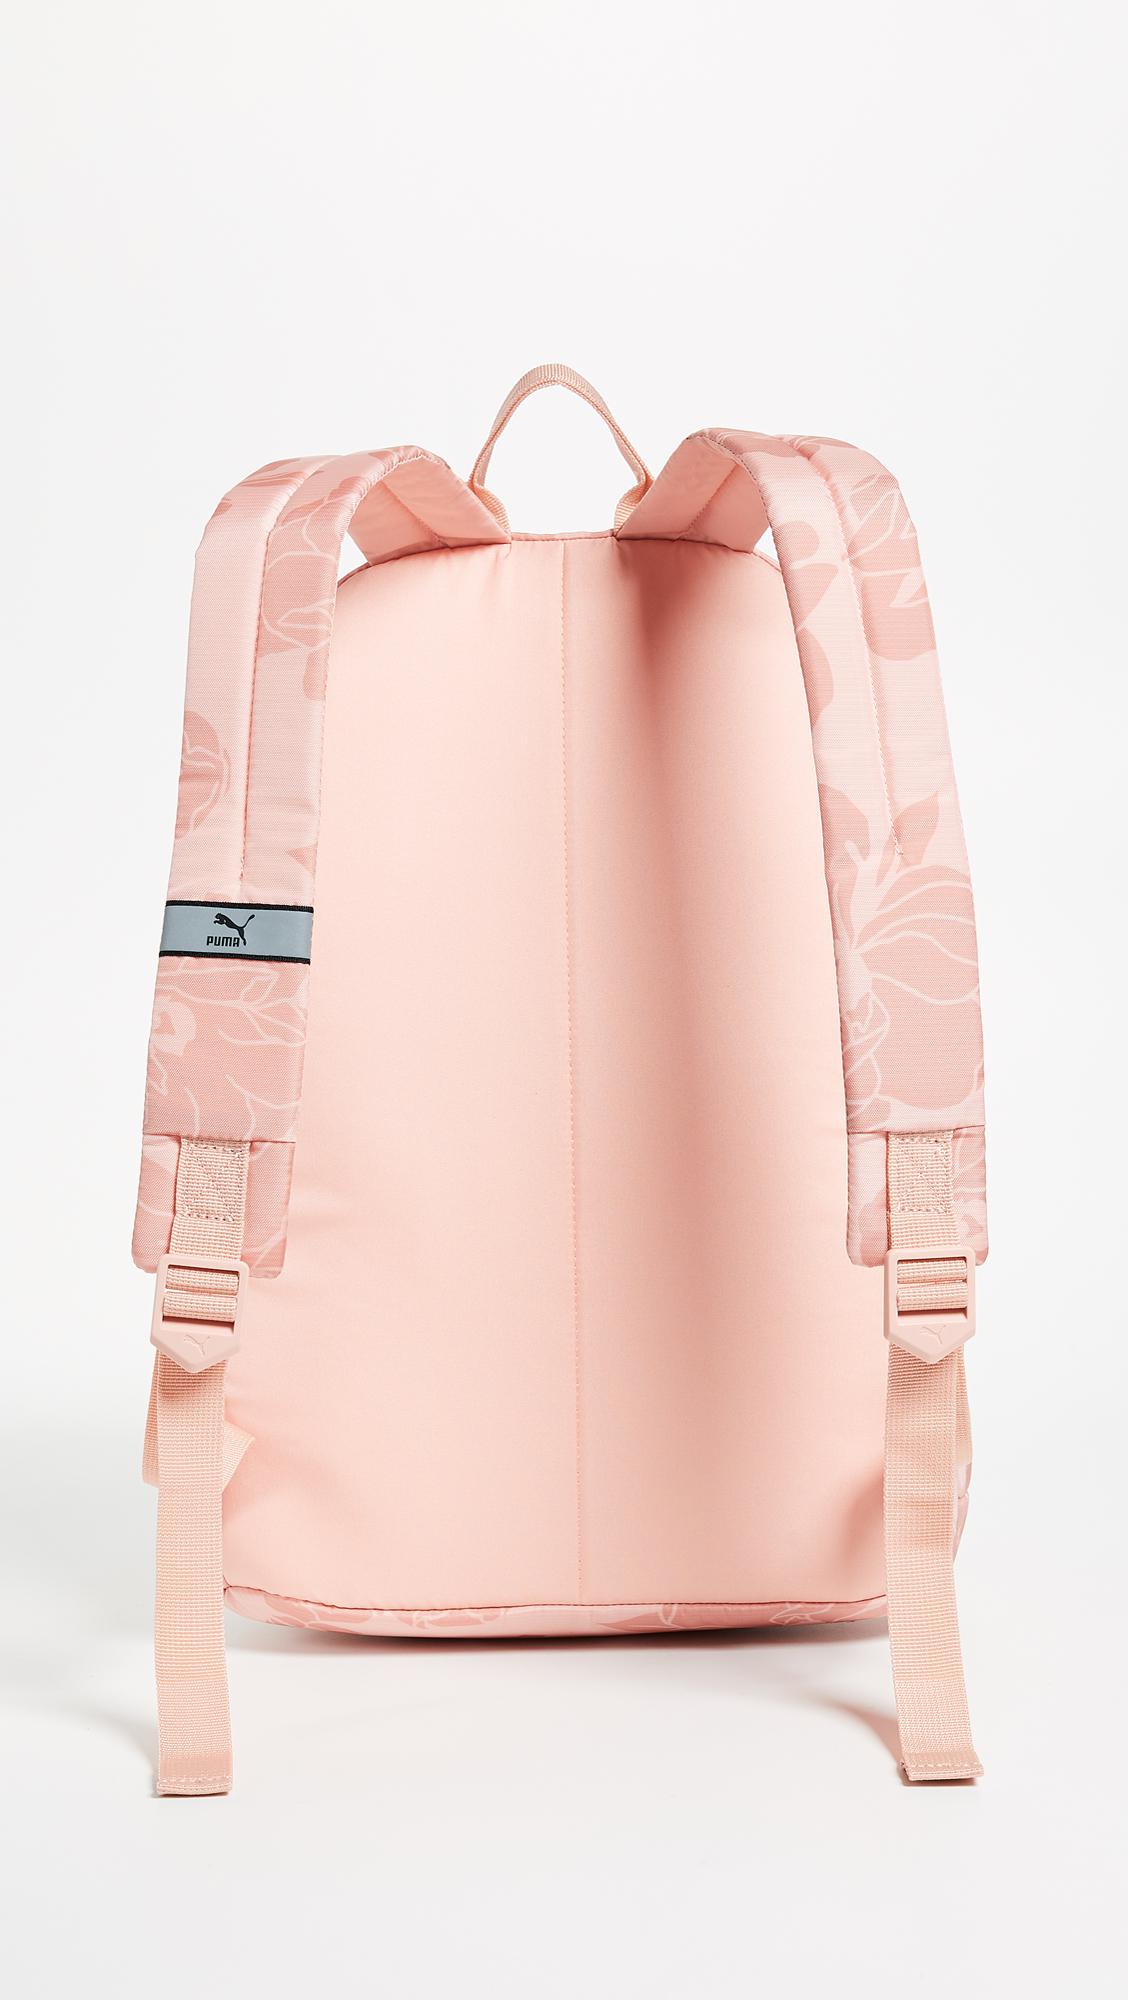 PUMA Synthetic Originals Backpack Rucksack in Light Pastel Pink (Pink) -  Lyst